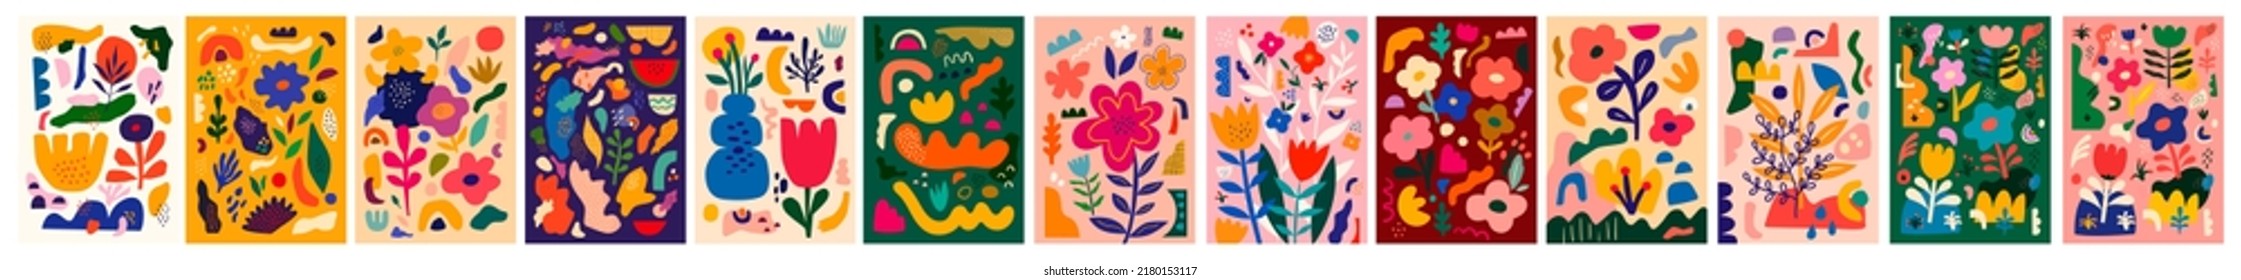 Trendy posters and cards with flowers and abstract patterns. Summer bright colourful abstract collection of posters. Set of amazing floral designs for Notebook covers.